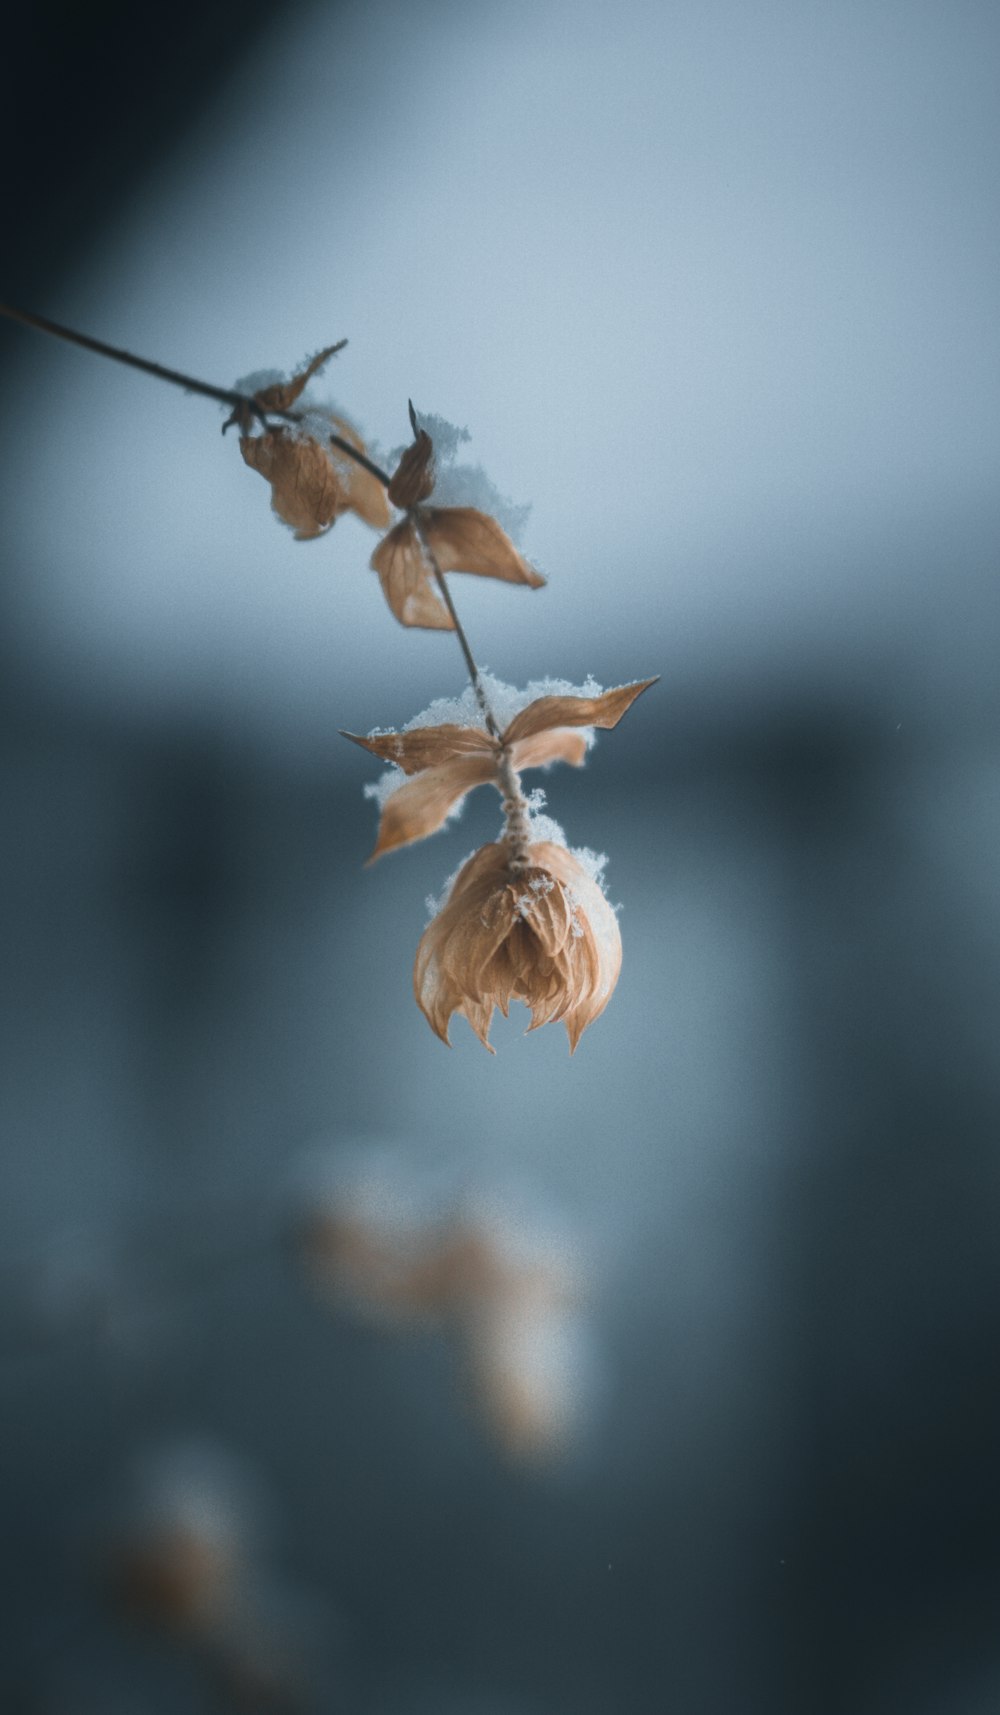 a dried flower is hanging from a twig